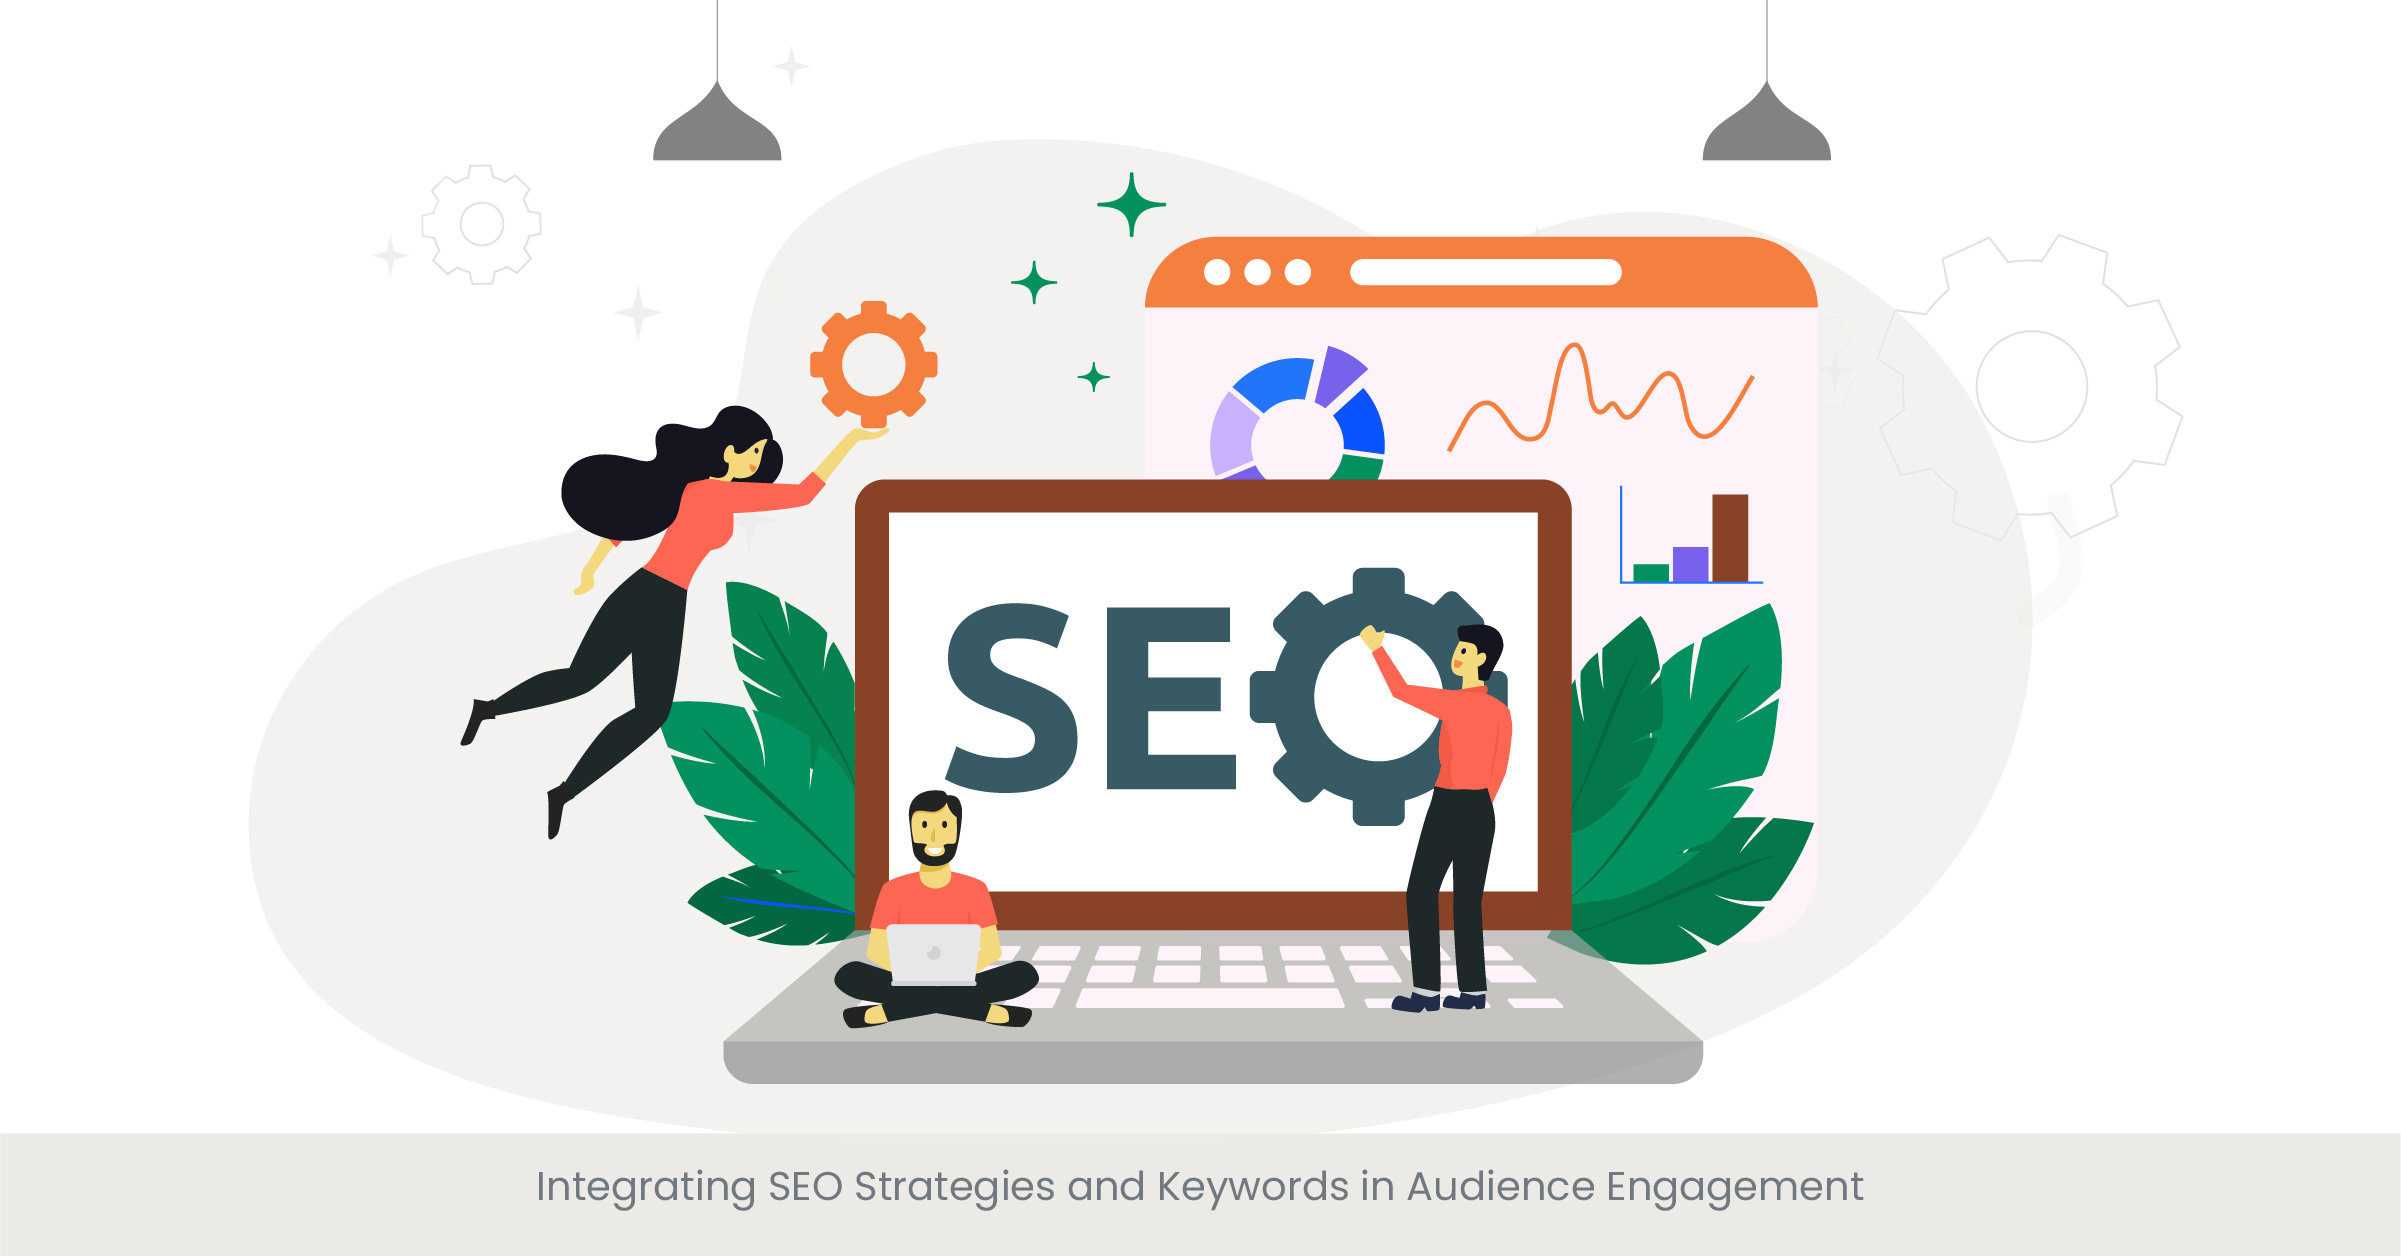 Integrating SEO Strategies and Keywords in Audience Engagement